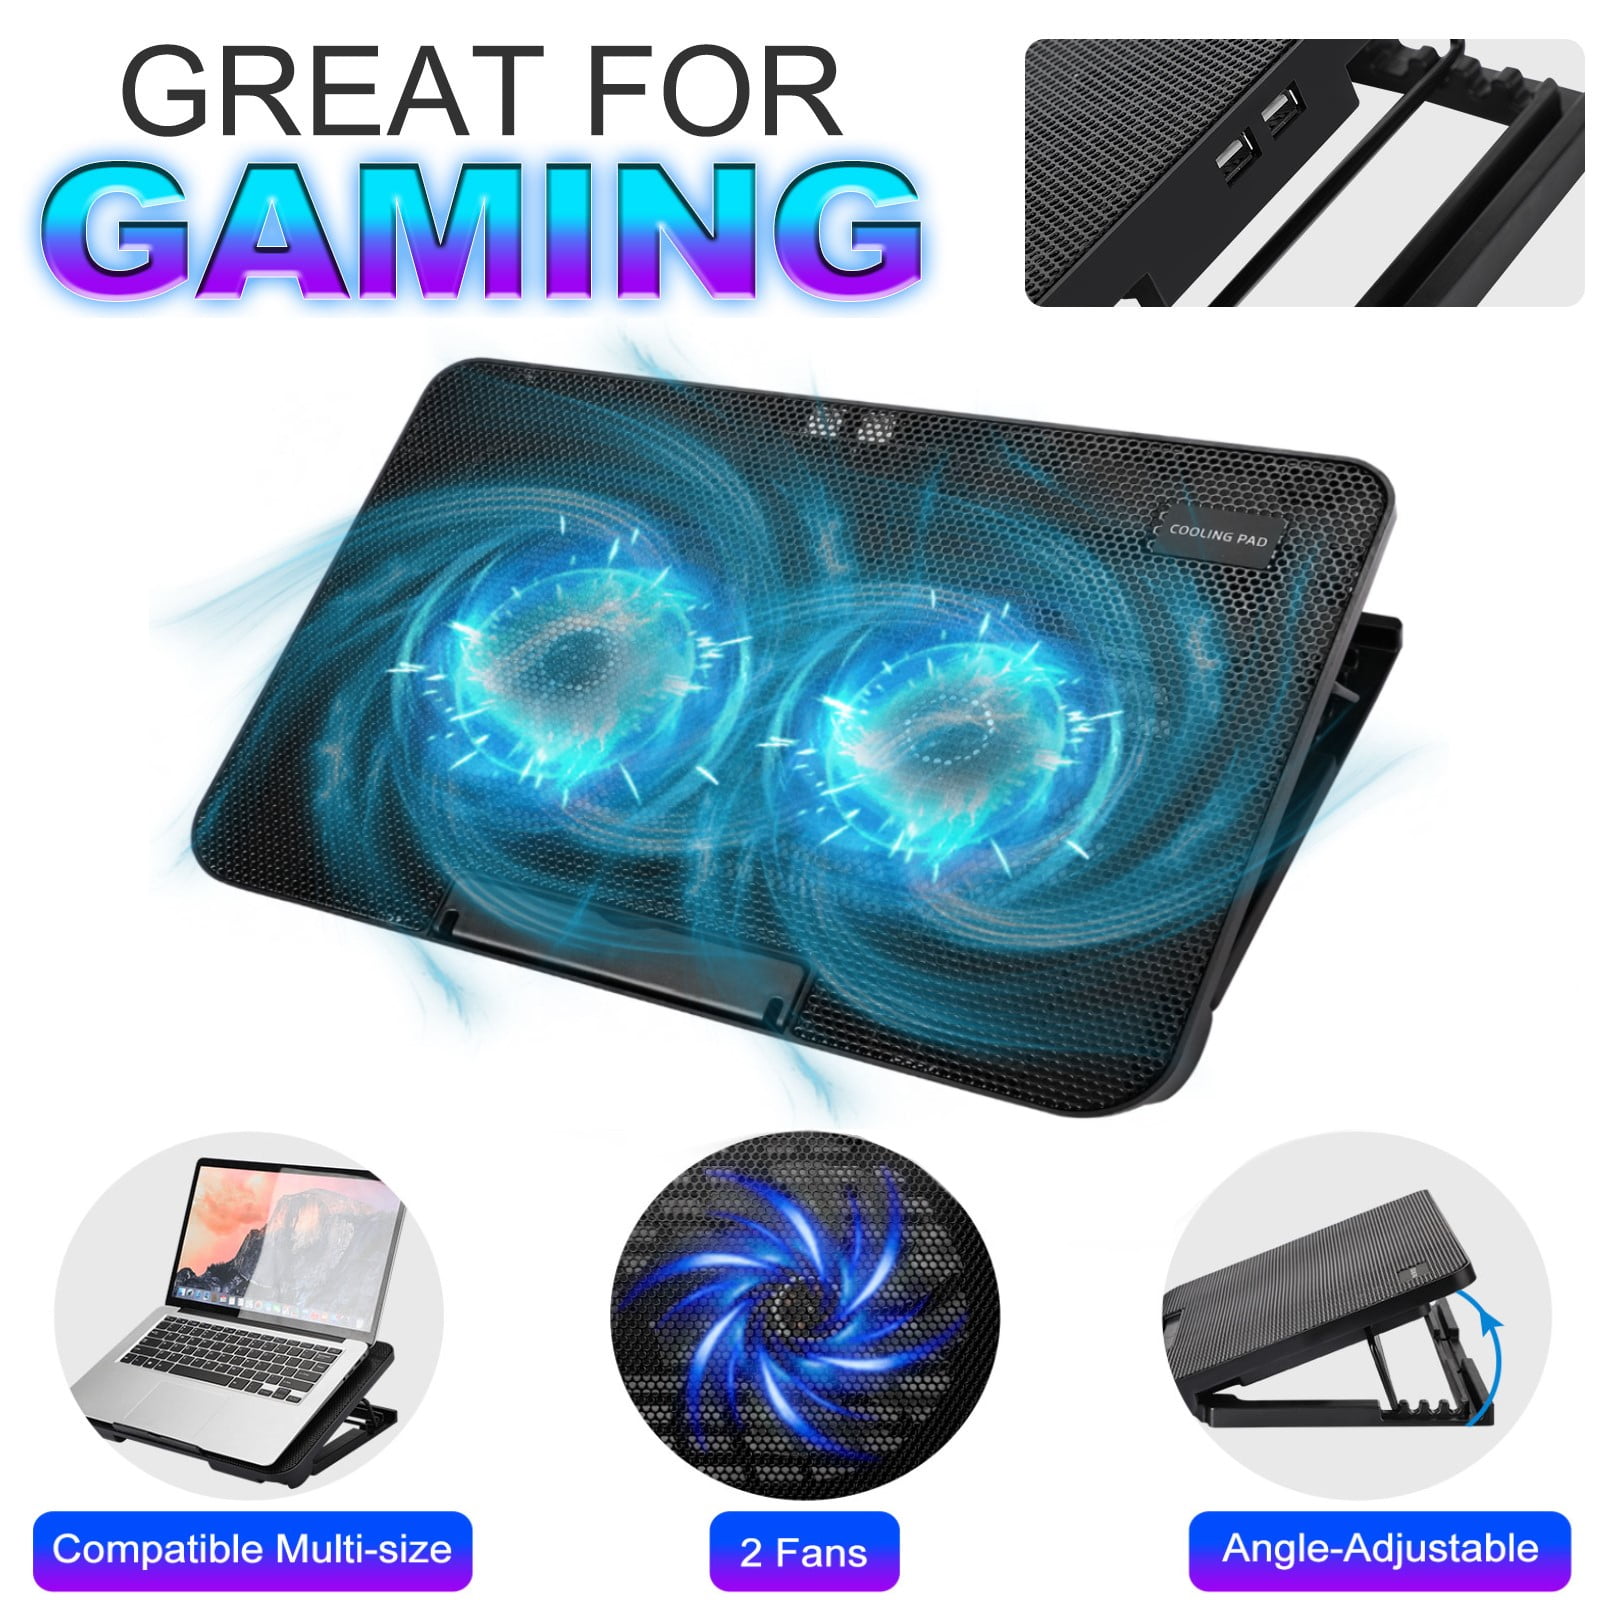 4 silent fans Red LED 12 to 17’’ PC/Laptop Gamer Cooler EMPIRE GAMING Storm Cooler 3 adjustable positions 2 USB ports